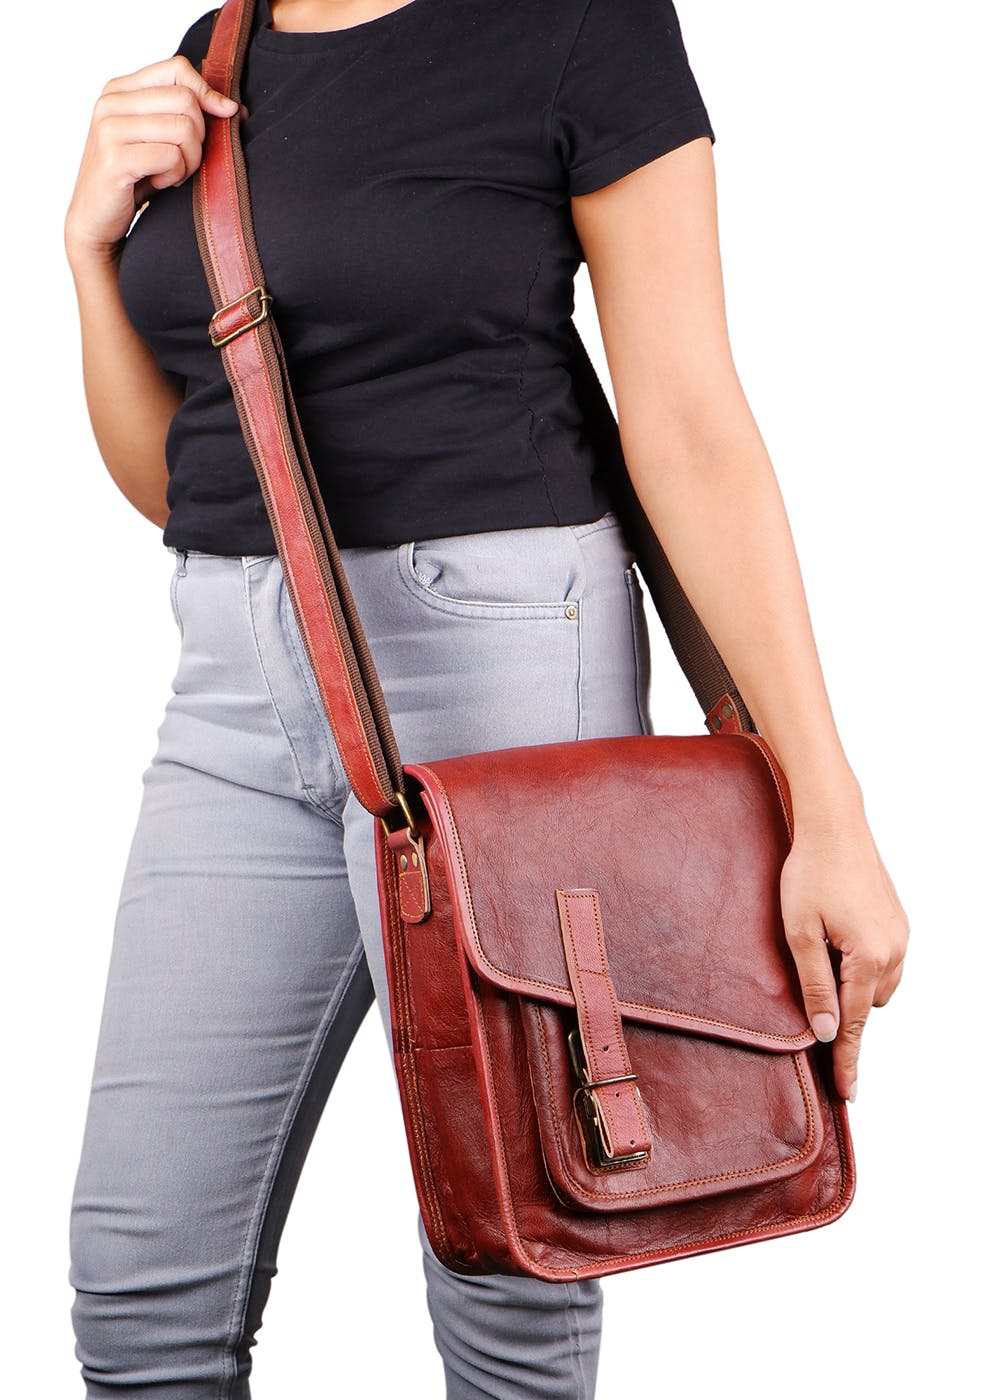 Real Leather Cross Body Bag